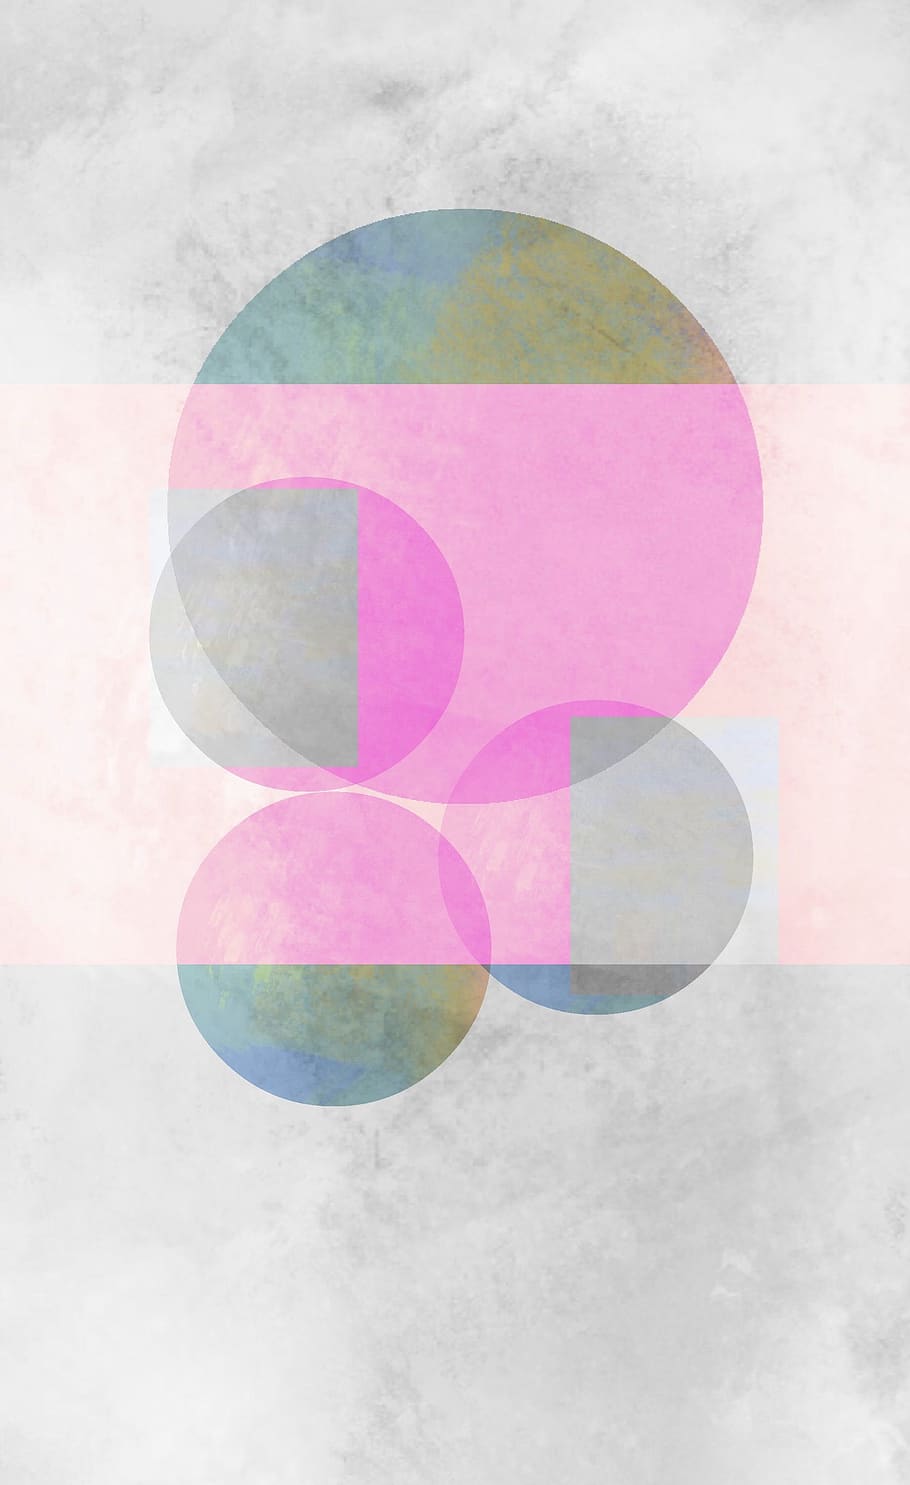 abstract, geometric, minimalism, pink, shapes, texture, rough, circles, simple, decorative